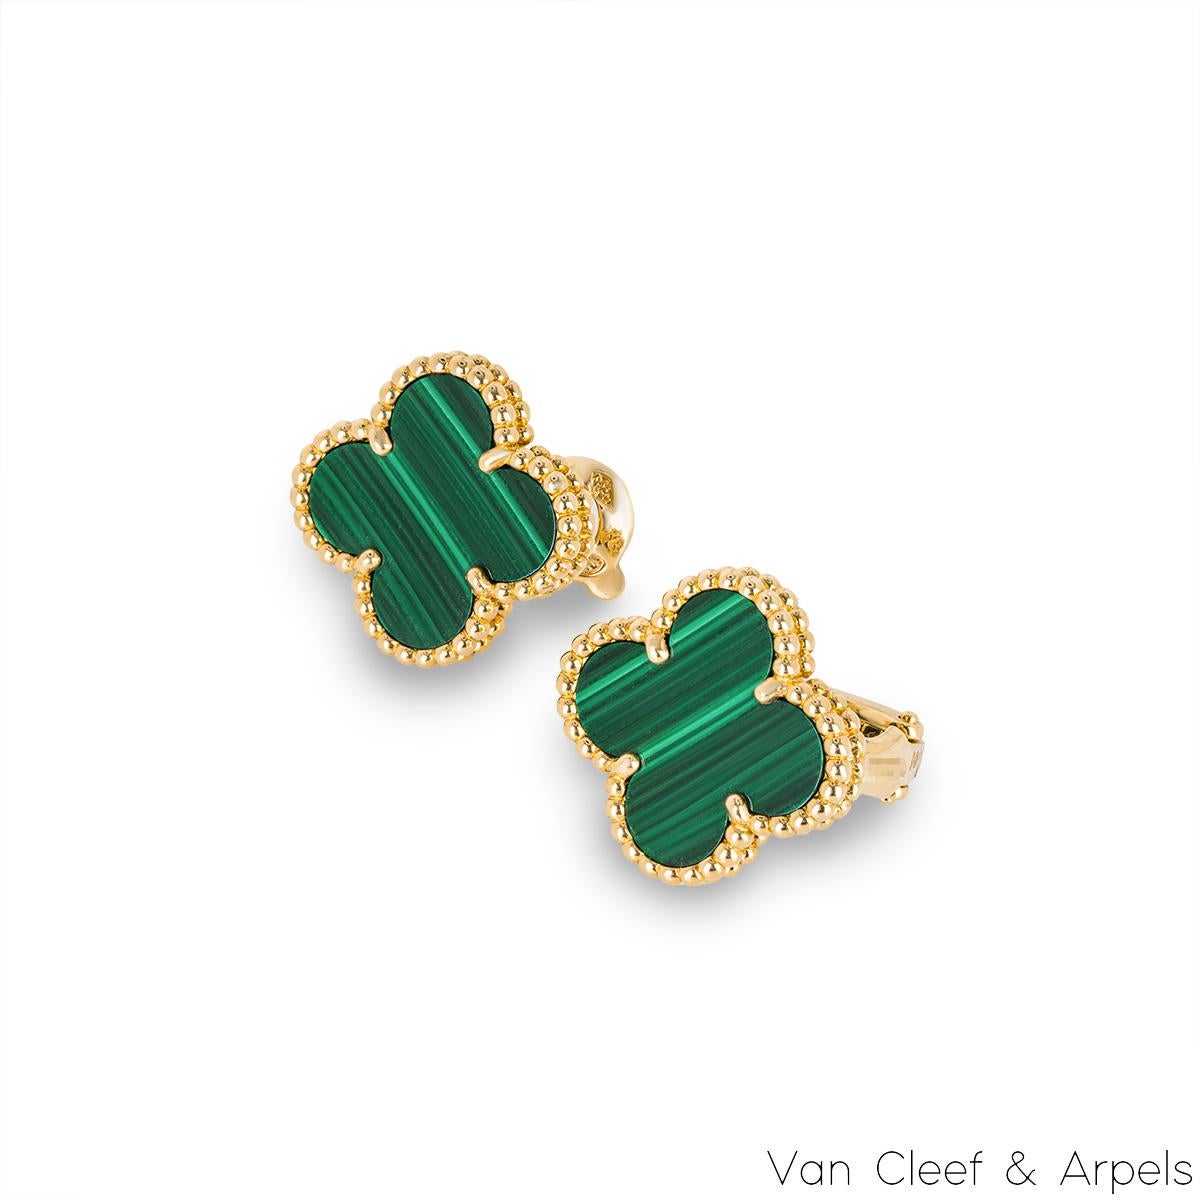 An elegant pair of 18k yellow gold malachite Van Cleef & Arpels earrings from the Vintage Alhambra collection. The earrings feature the iconic 4-leaf clover motif, with a malachite inlay set to the centre, complemented by a beaded edge. The 1.5cm